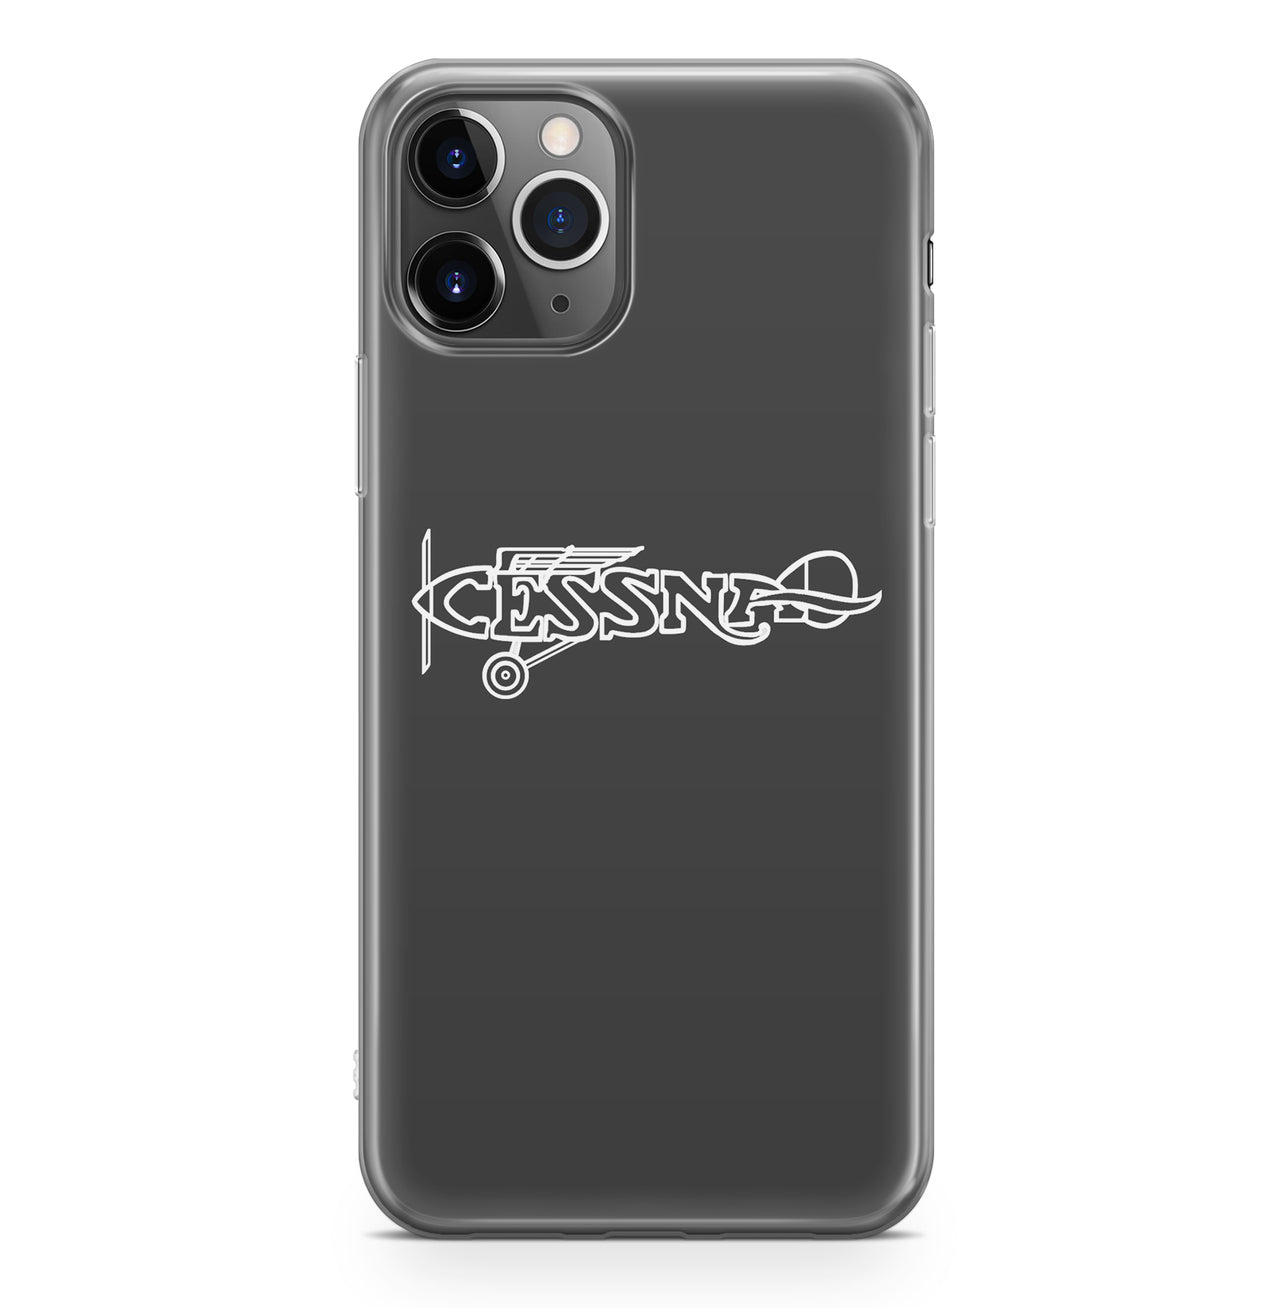 Special Cessna Text Designed iPhone Cases